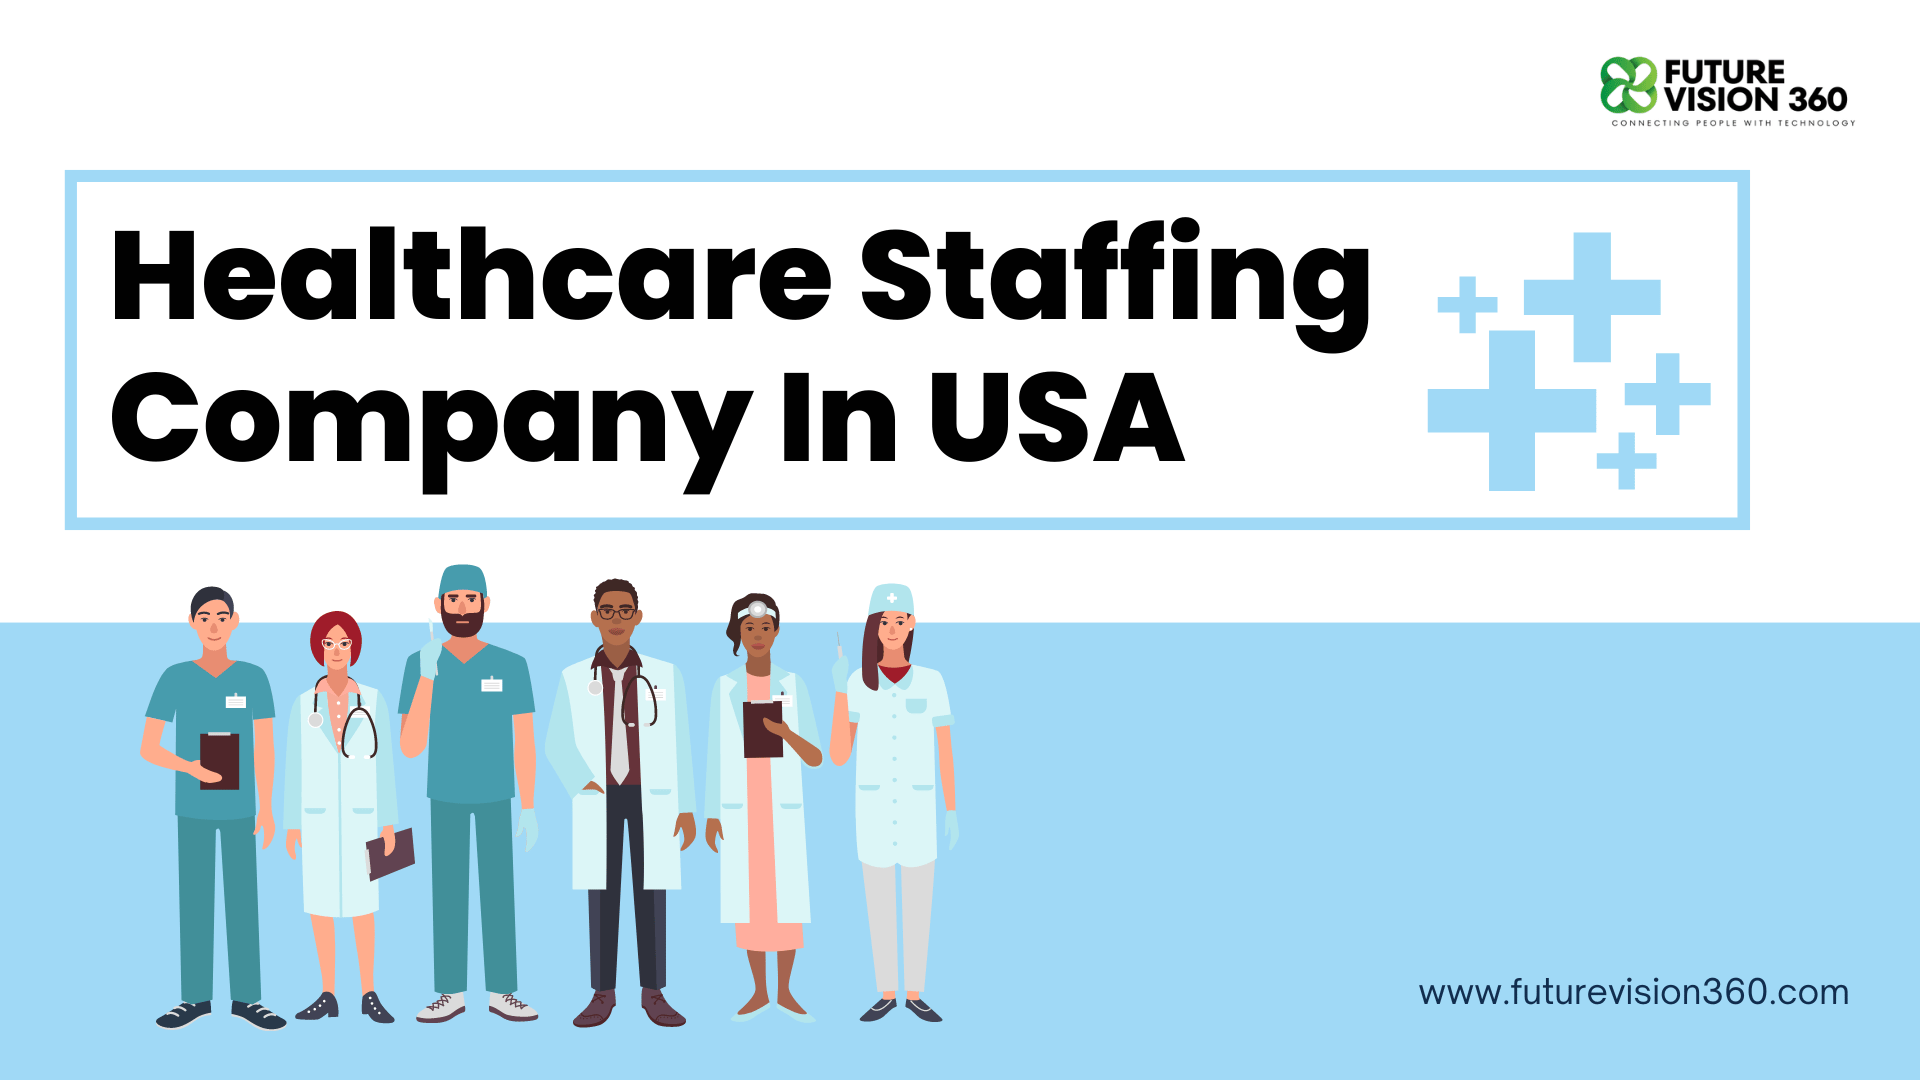 Healthcare Staffing Company In USA